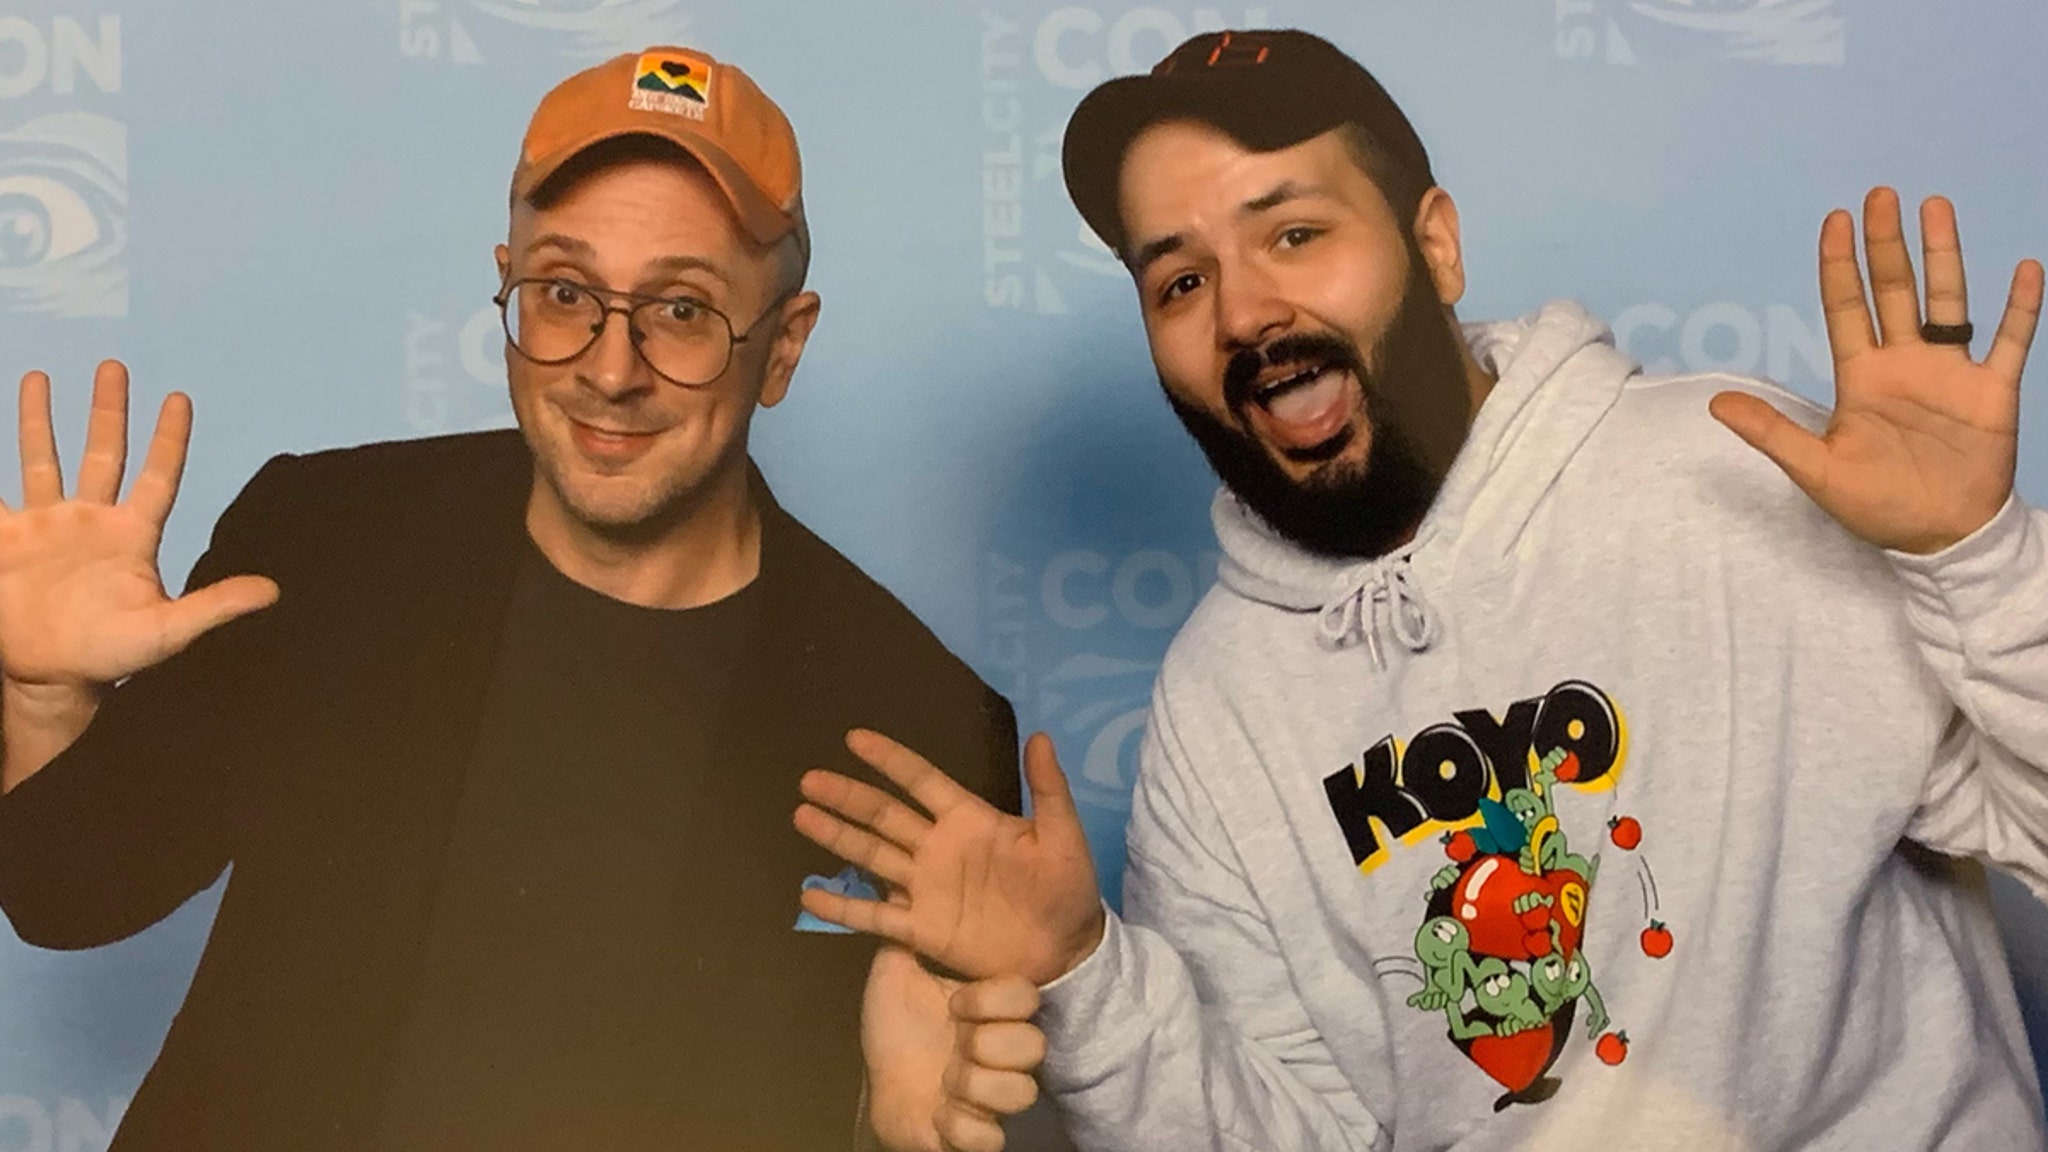 'Blue's Clues' Steve Burns Has Reunion with Make-A-Wish Patient 22 Years Later